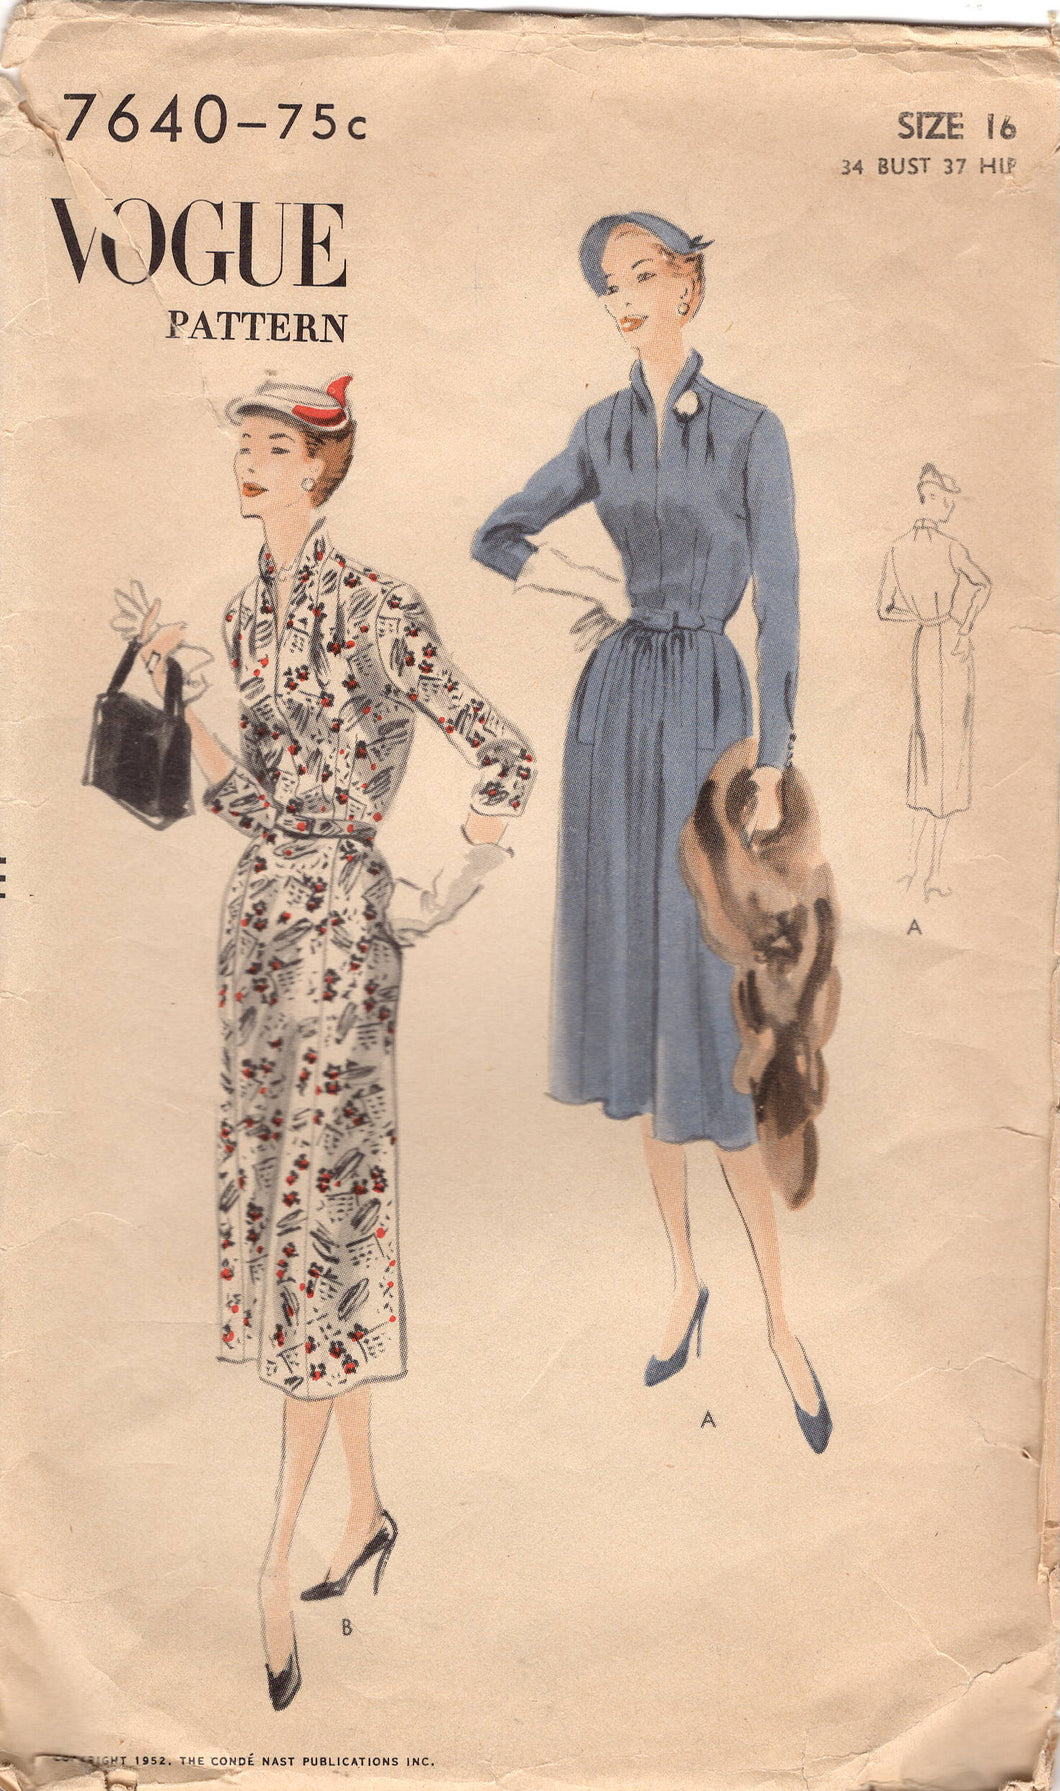 1950's Vogue One Piece Dress with Two style of Skirts and Tucked Shoulders - Bust 34